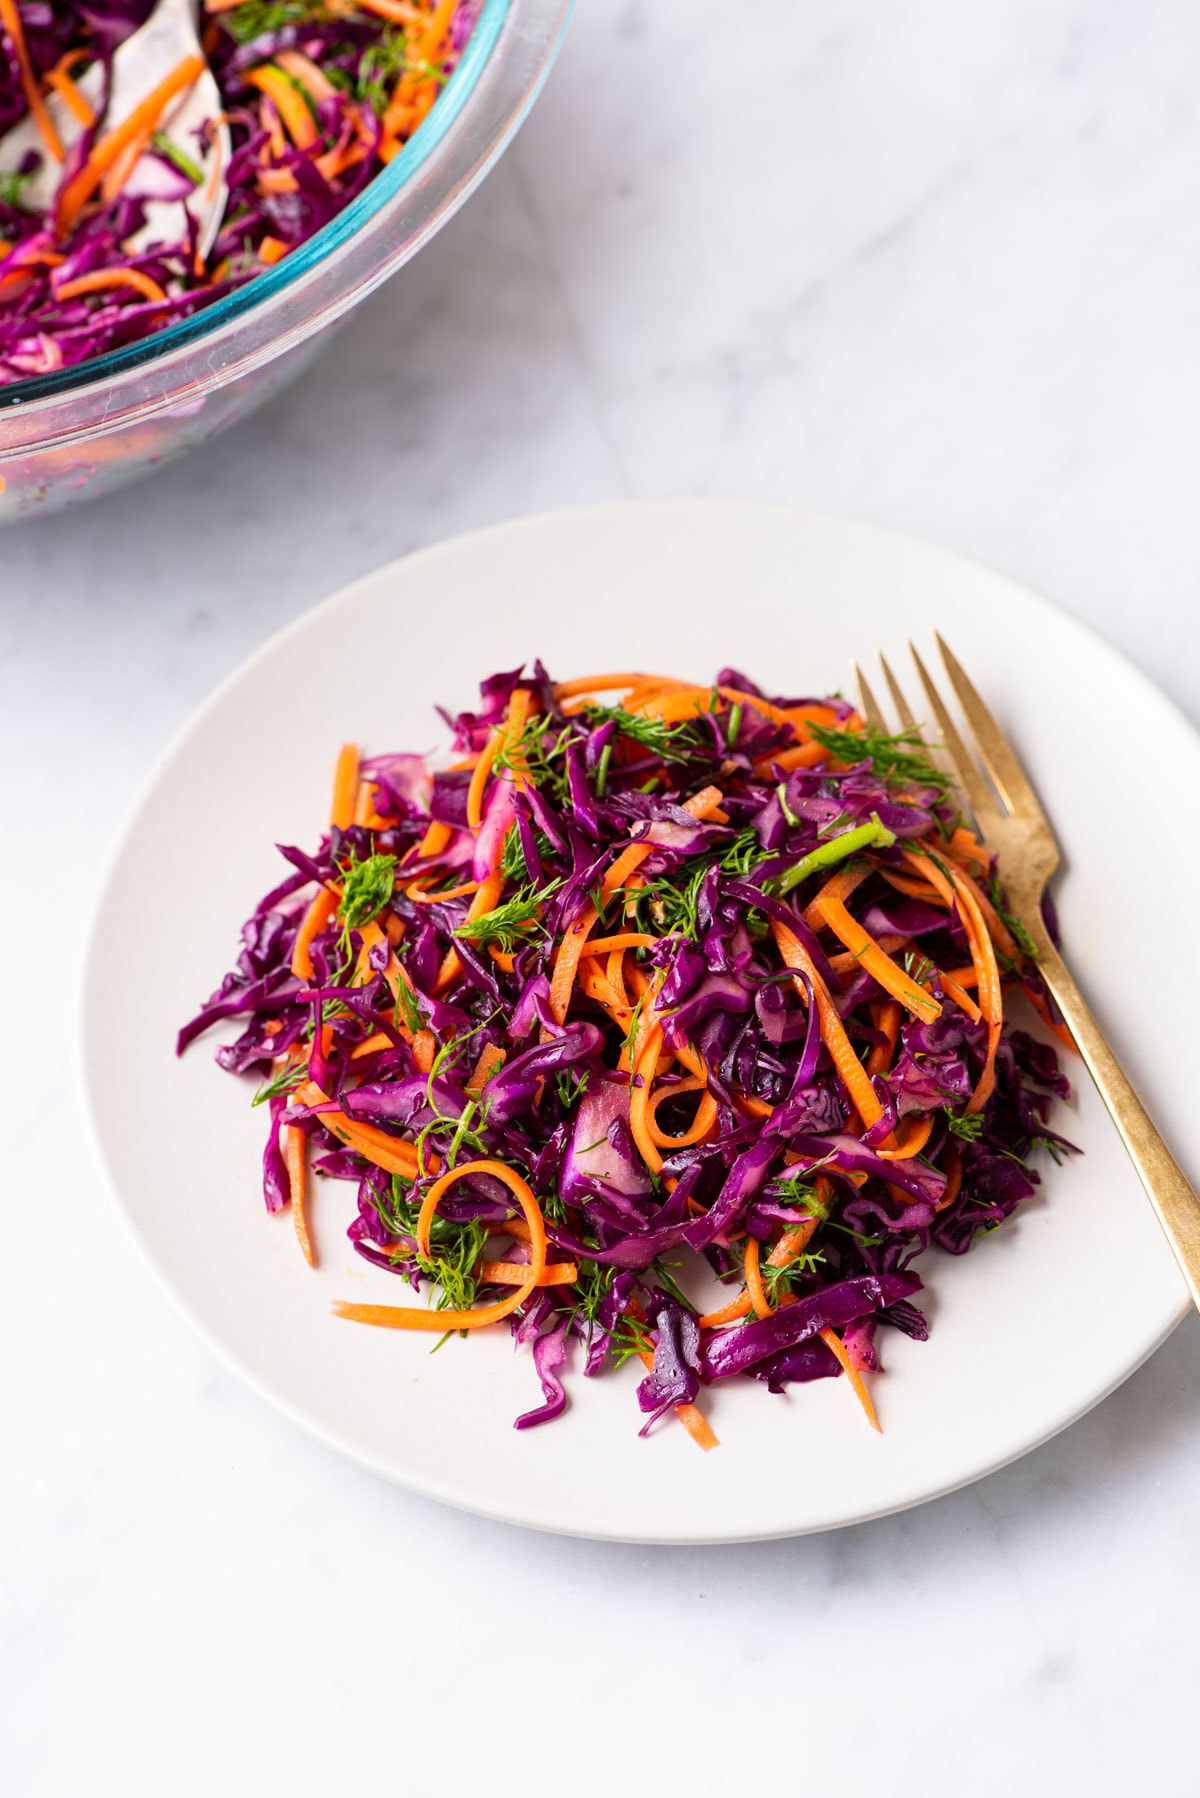 Mayo-less purple cabbage slaw on a beige plate on a marble table.